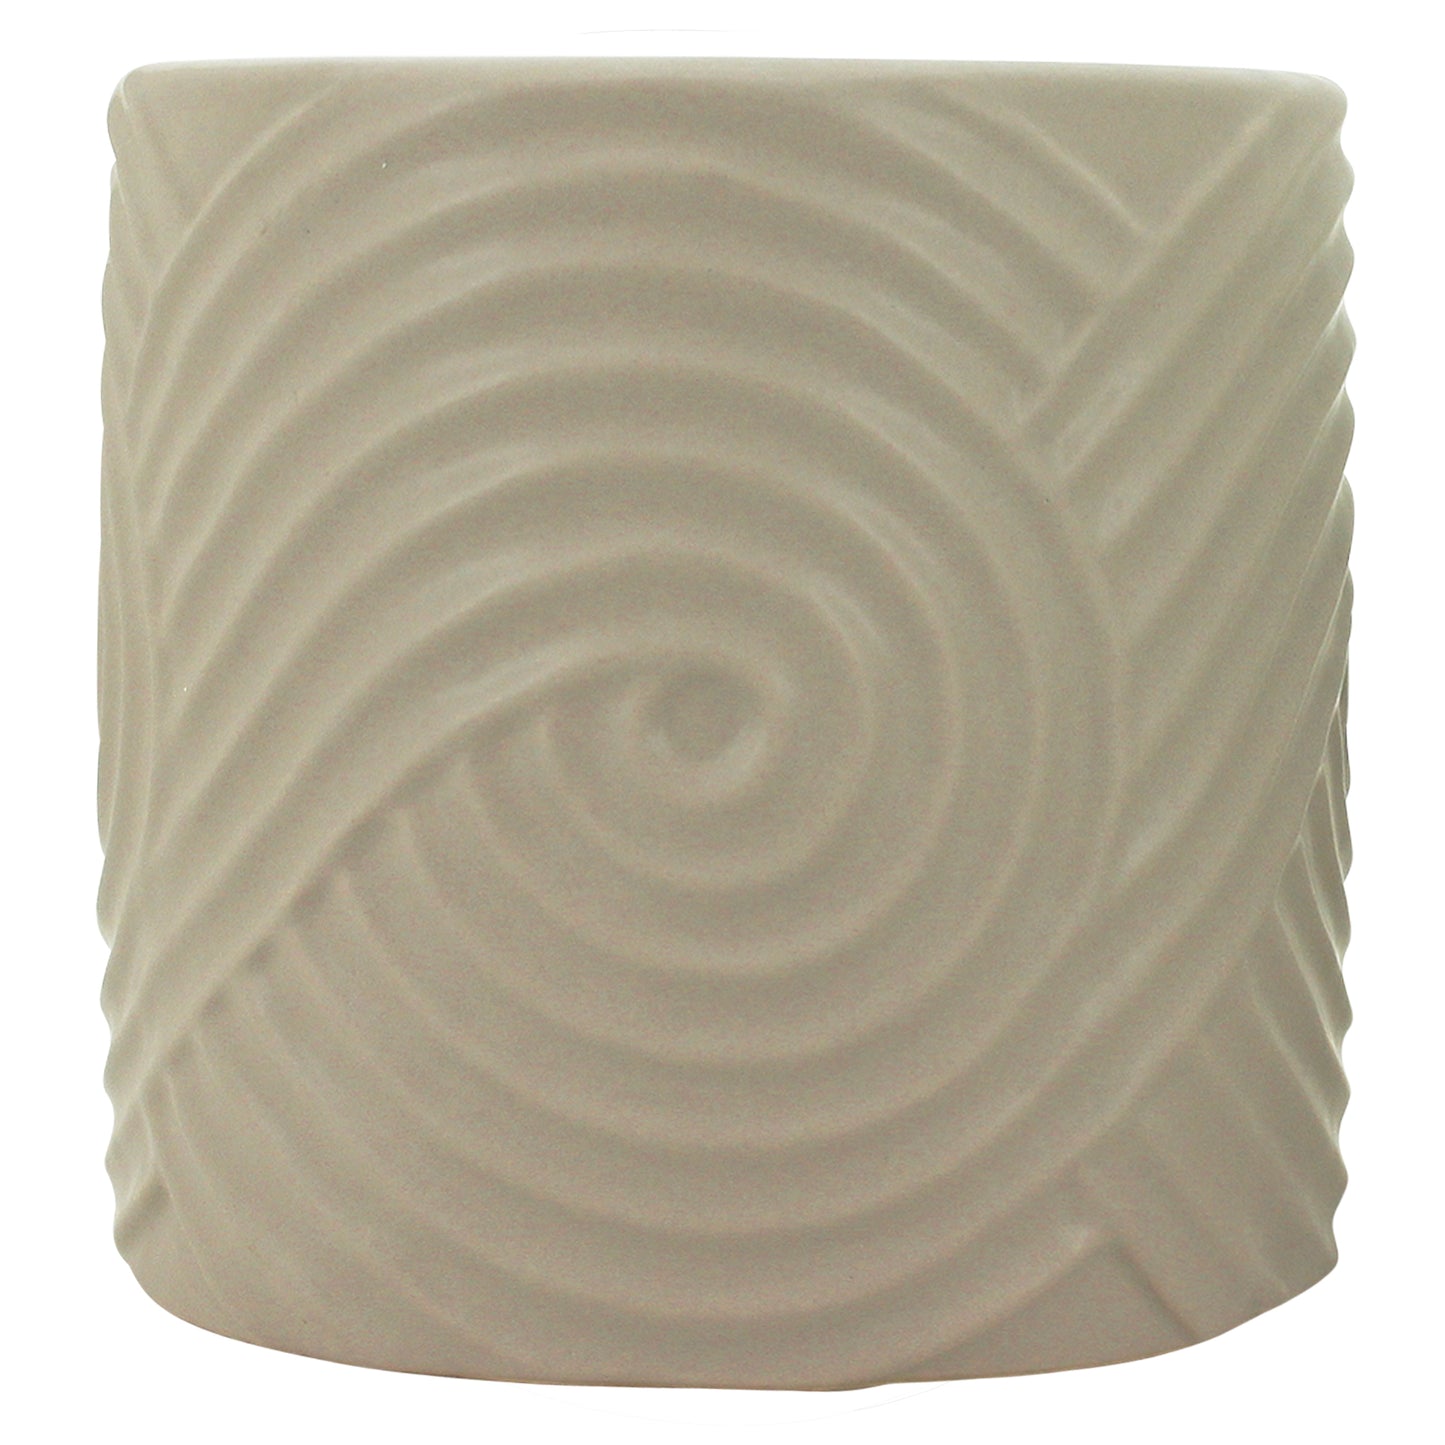 NF "Swirling" Planter Pot Taupe 19x18cm